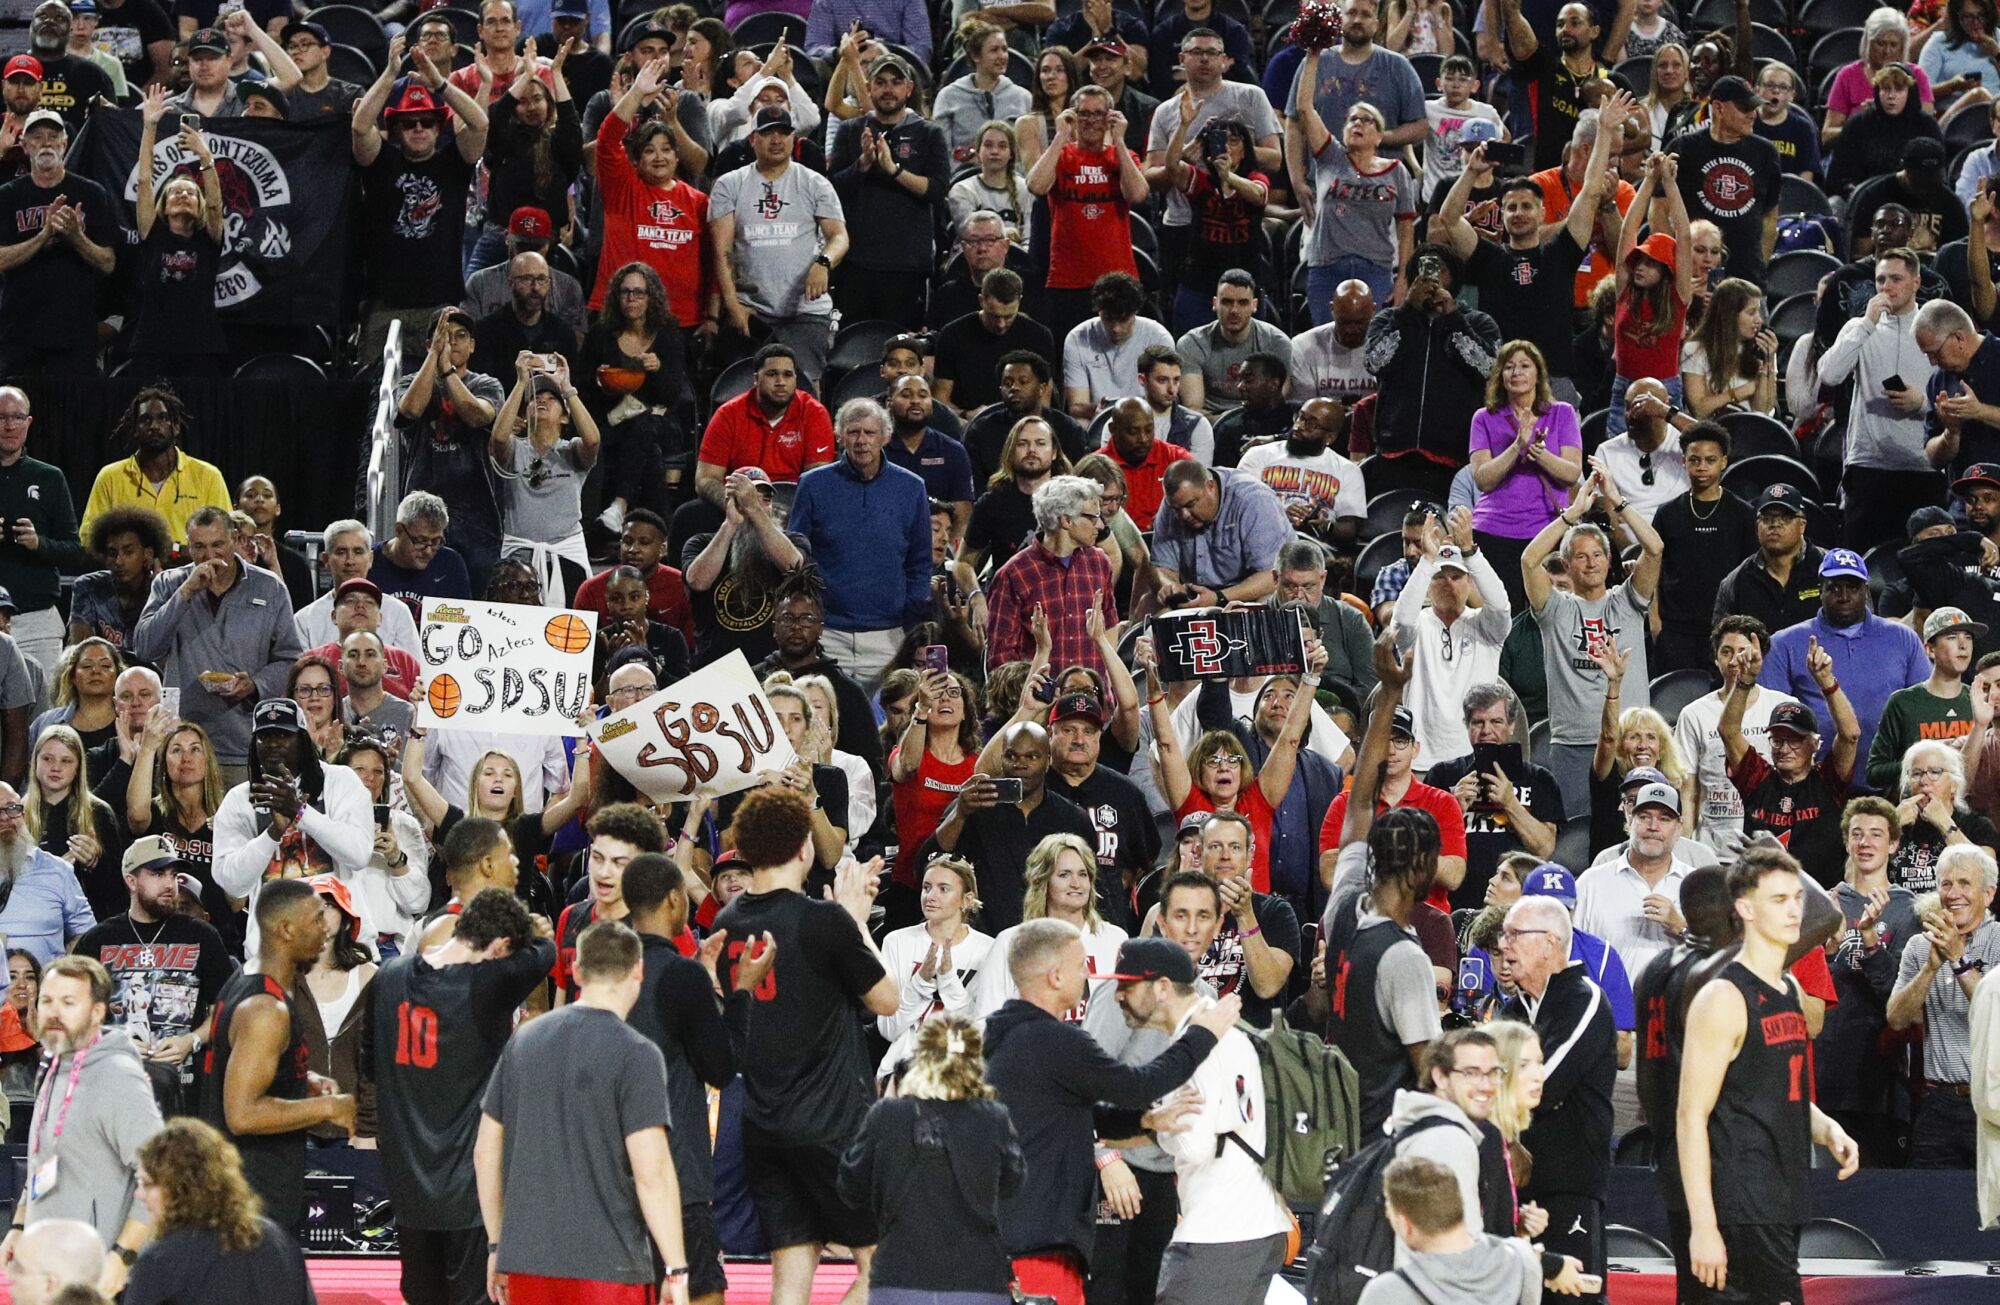 Fans cheer during San Diego State's practice leading up to the Final Four at the NRG Stadium.